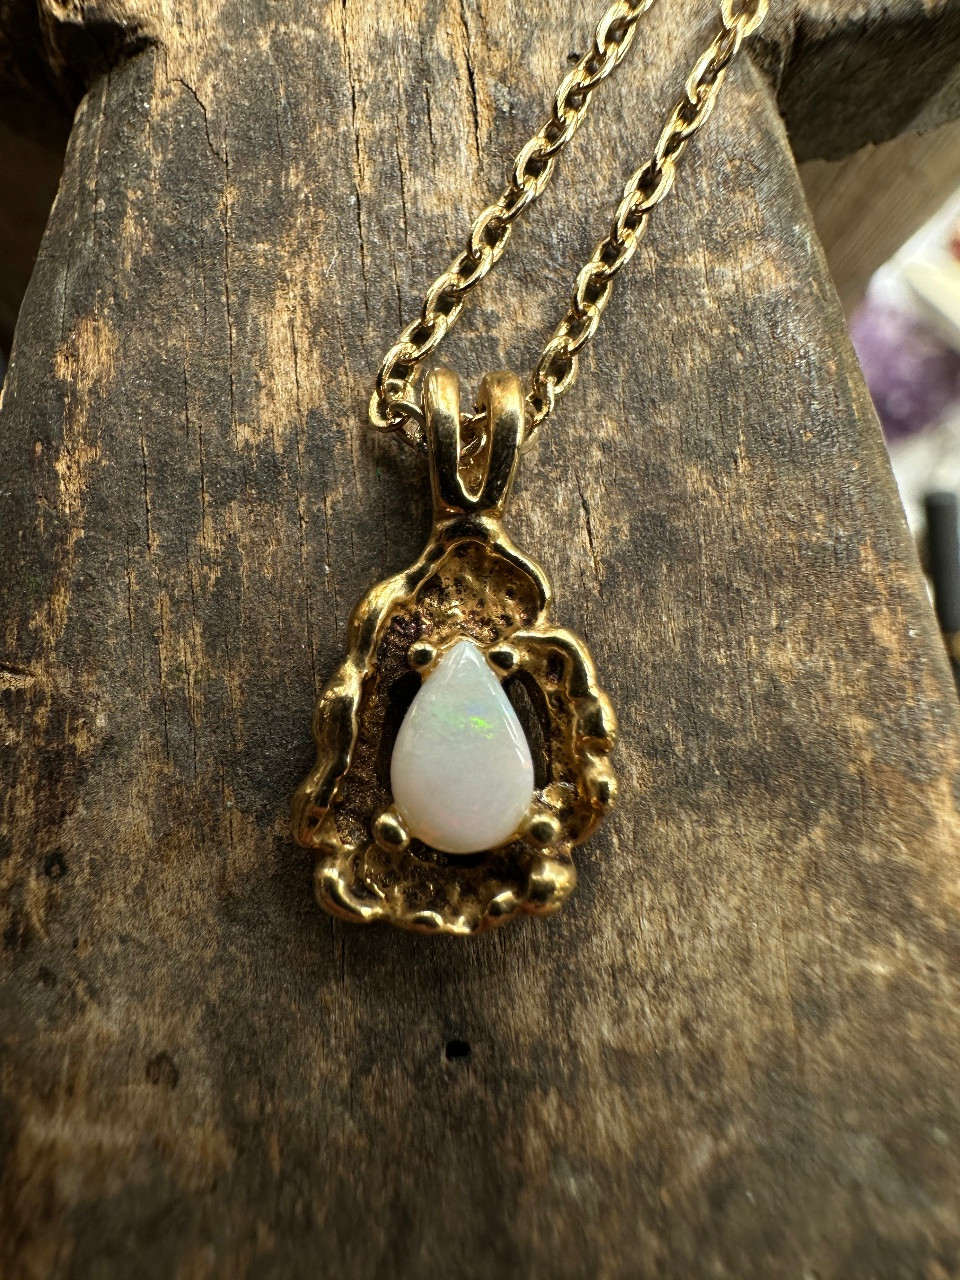 Vintage Opal Bead & Rock Crystal Necklace with 9ct White Gold Clasp  1920/1930s - 23205 / LA473232 | LoveAntiques.com